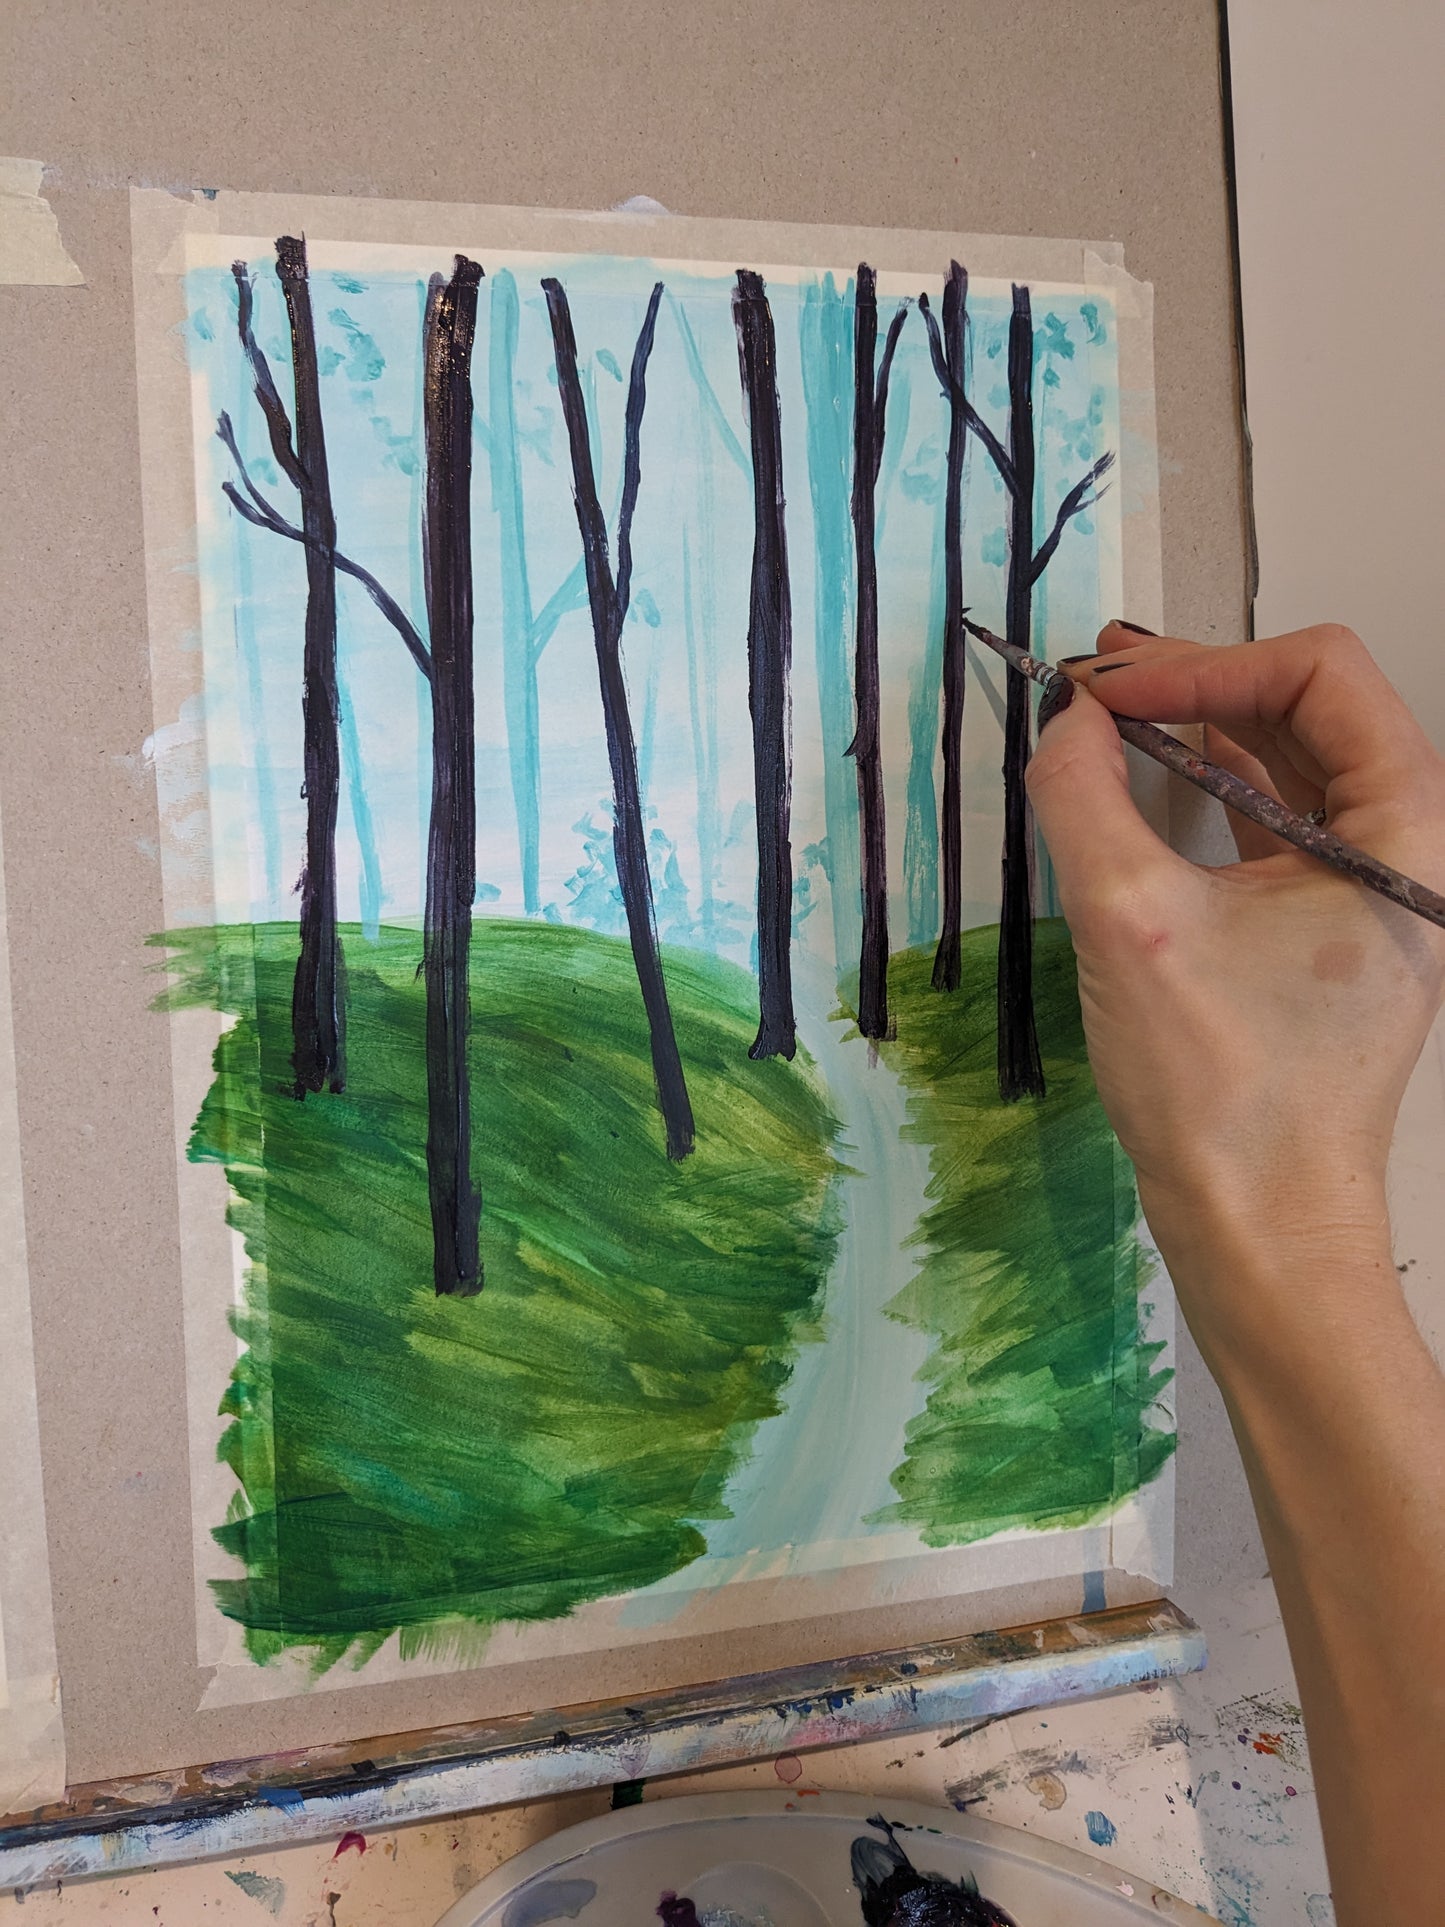 DAPPLED WOODLAND - Painting Workshop at The Howard Centre, Welwyn, Hertfordshire - Thursday 15th February